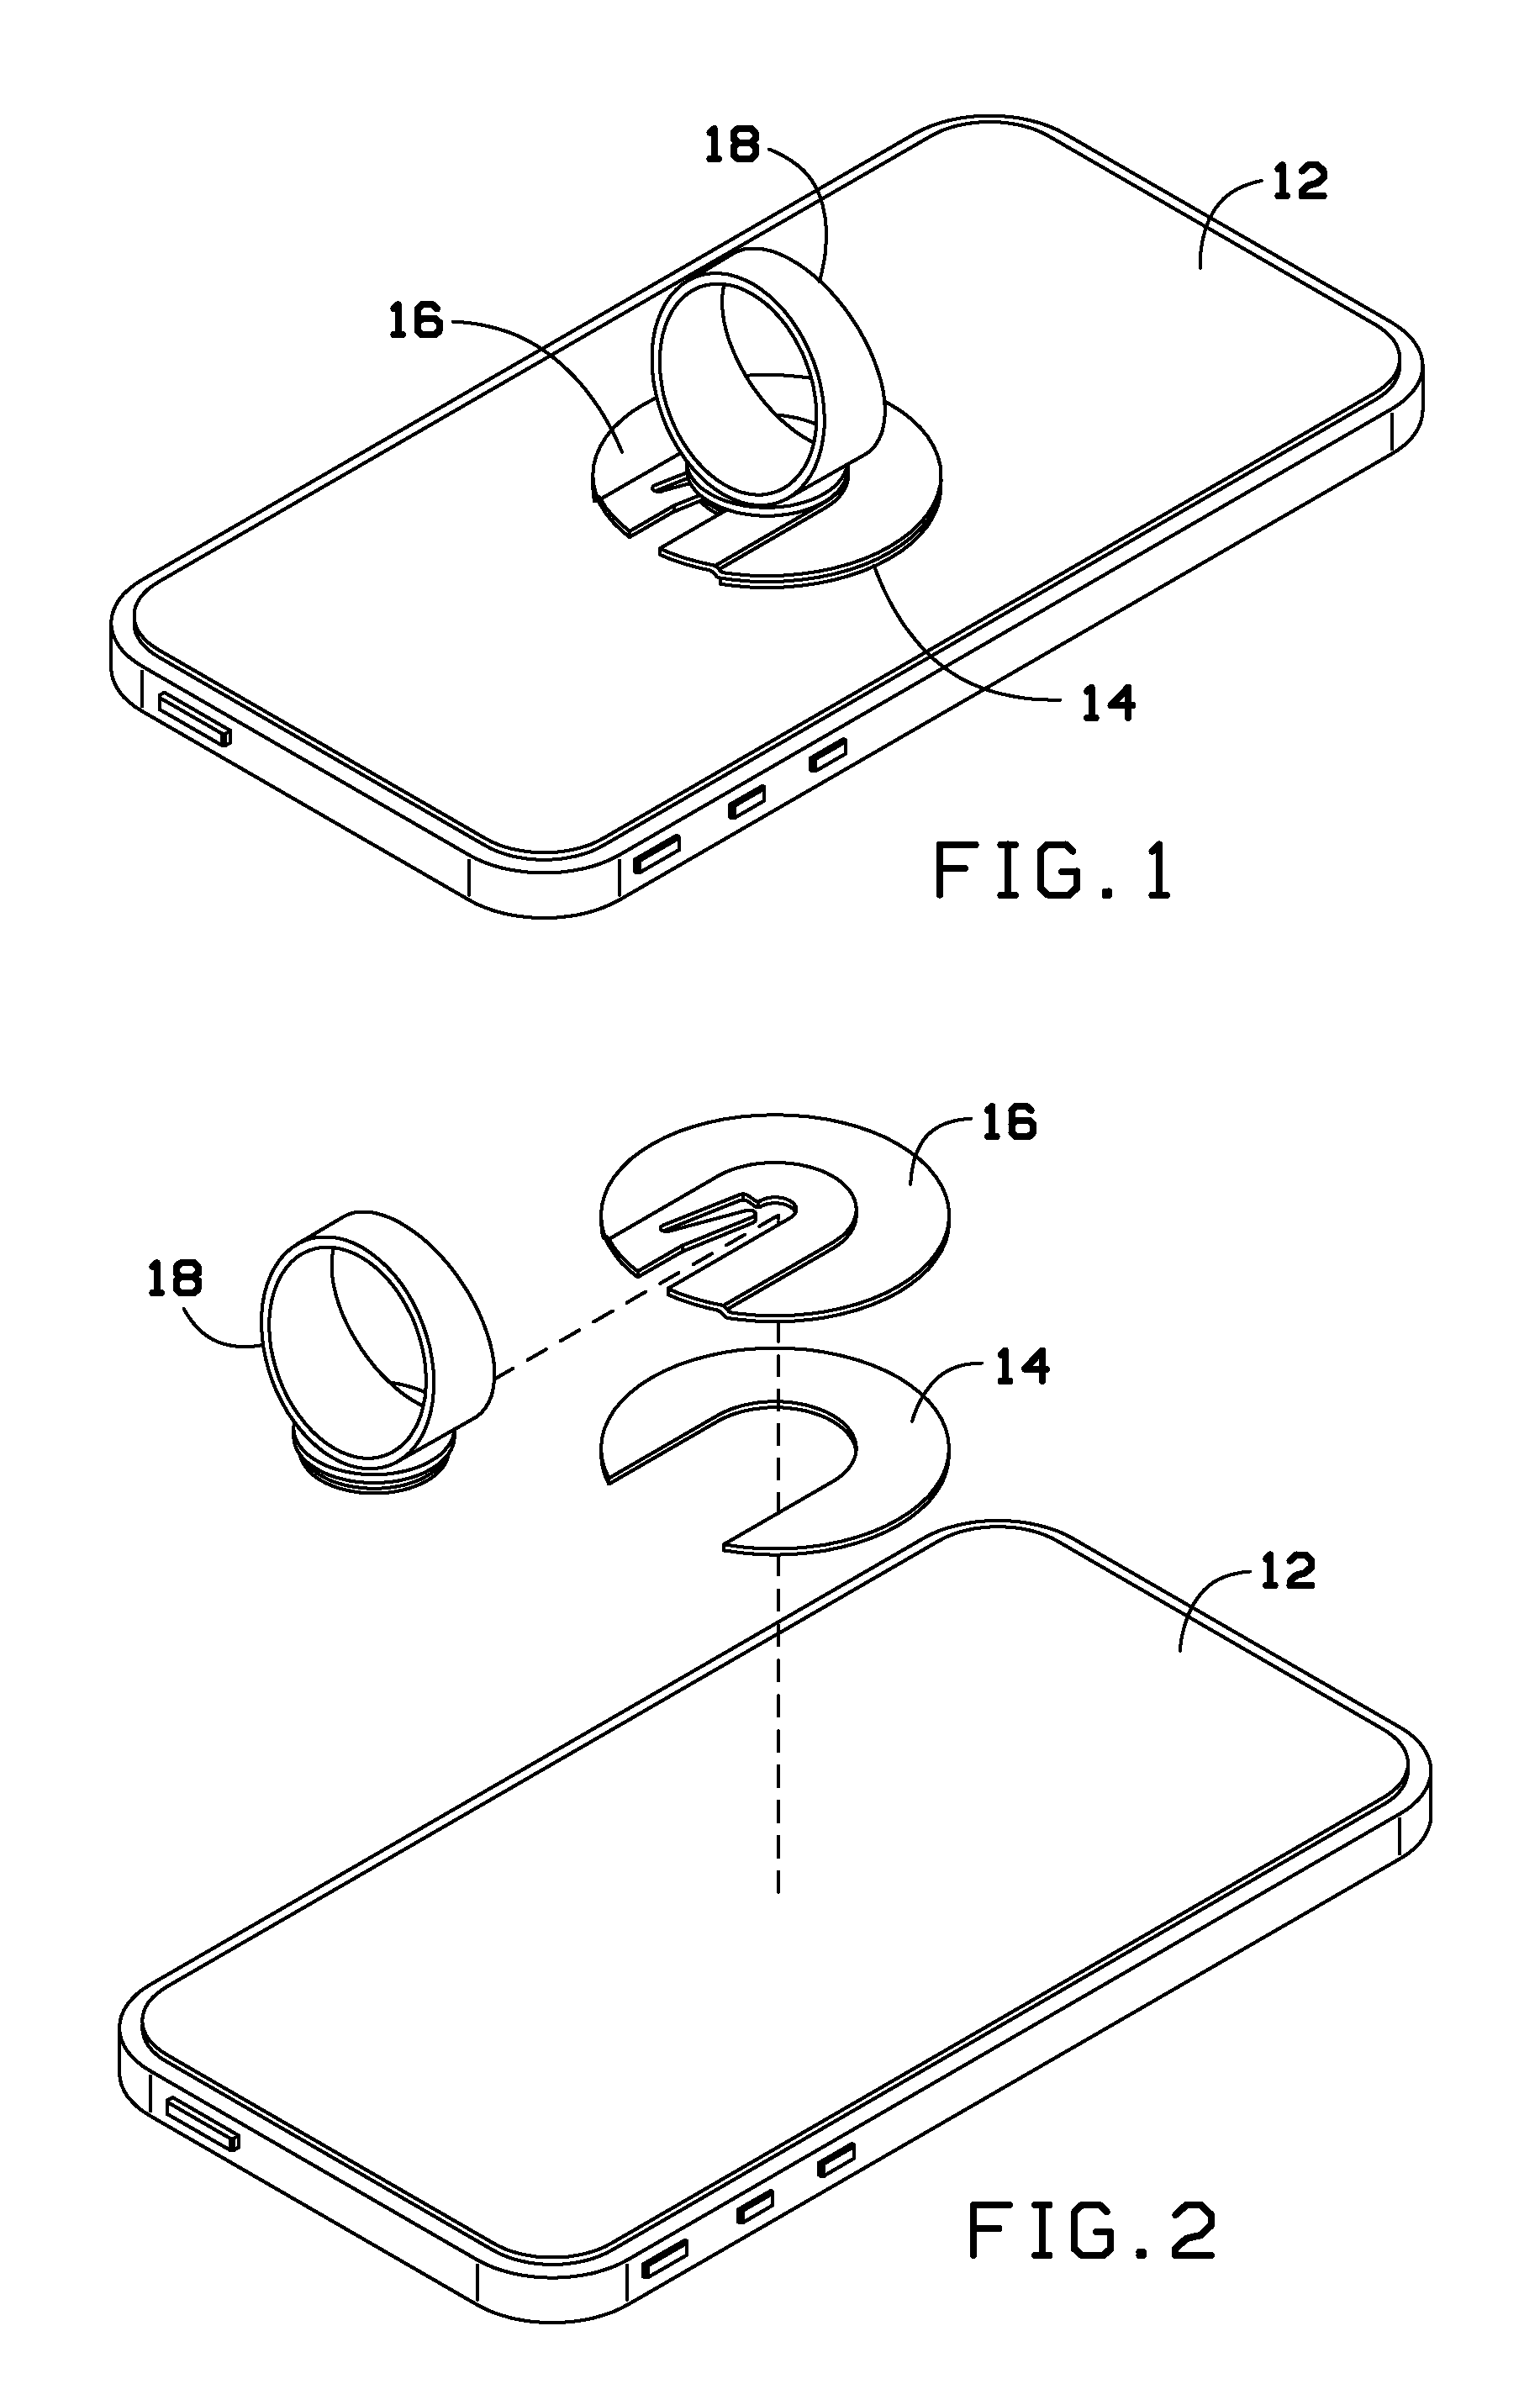 Attachable holder with flexible ring for any handheld device